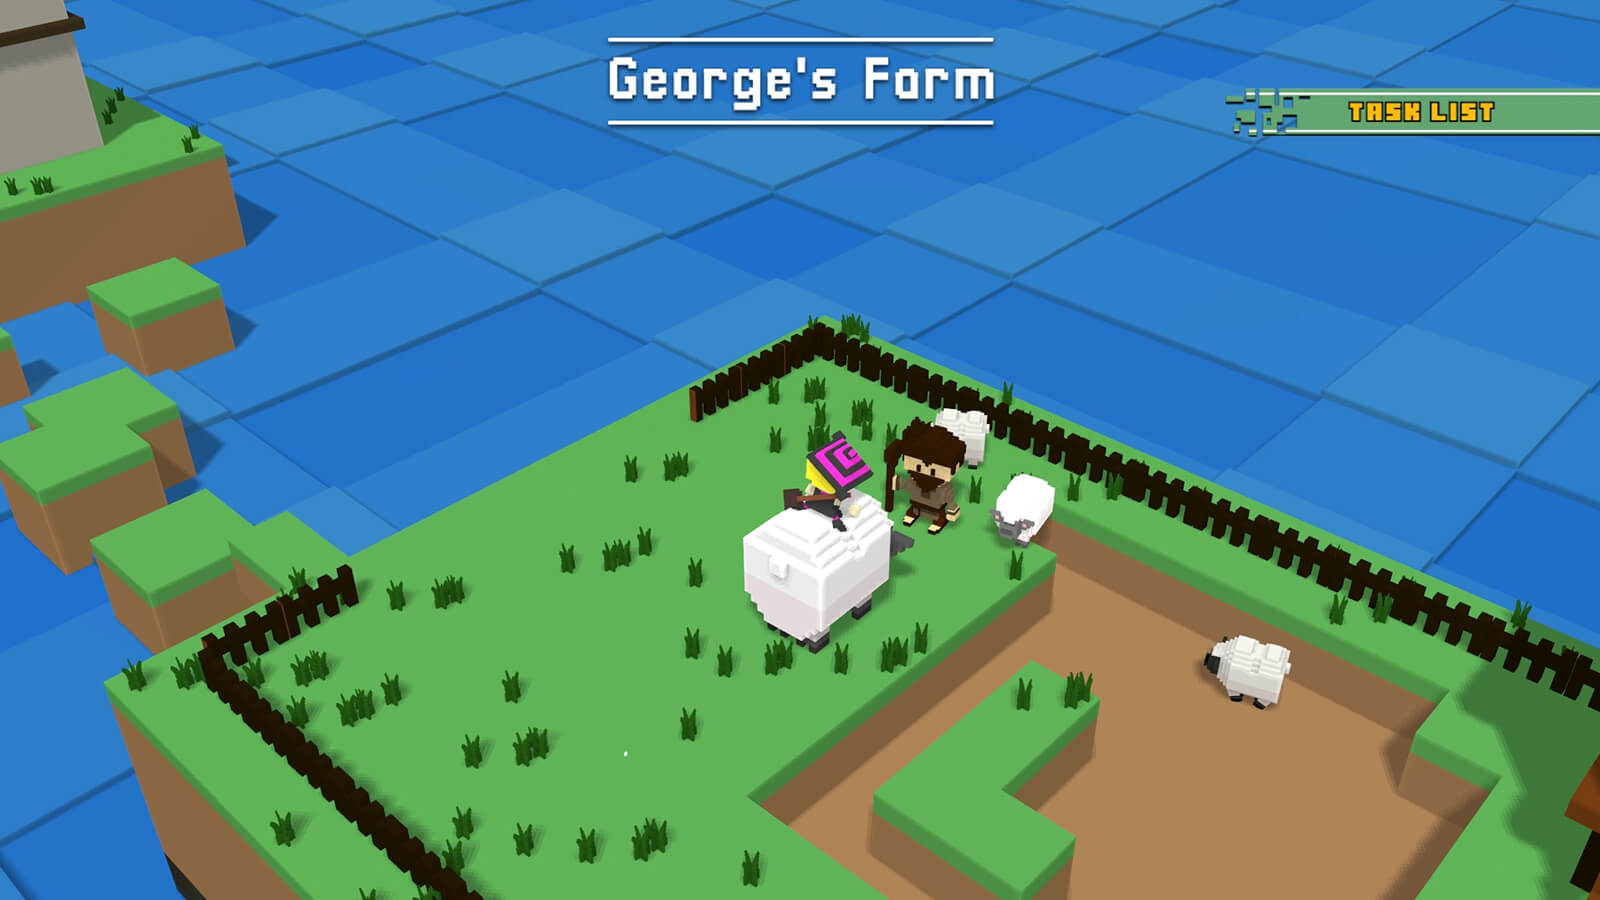 A witch character rides on top of a sheep on an island marked as "George's Farm"